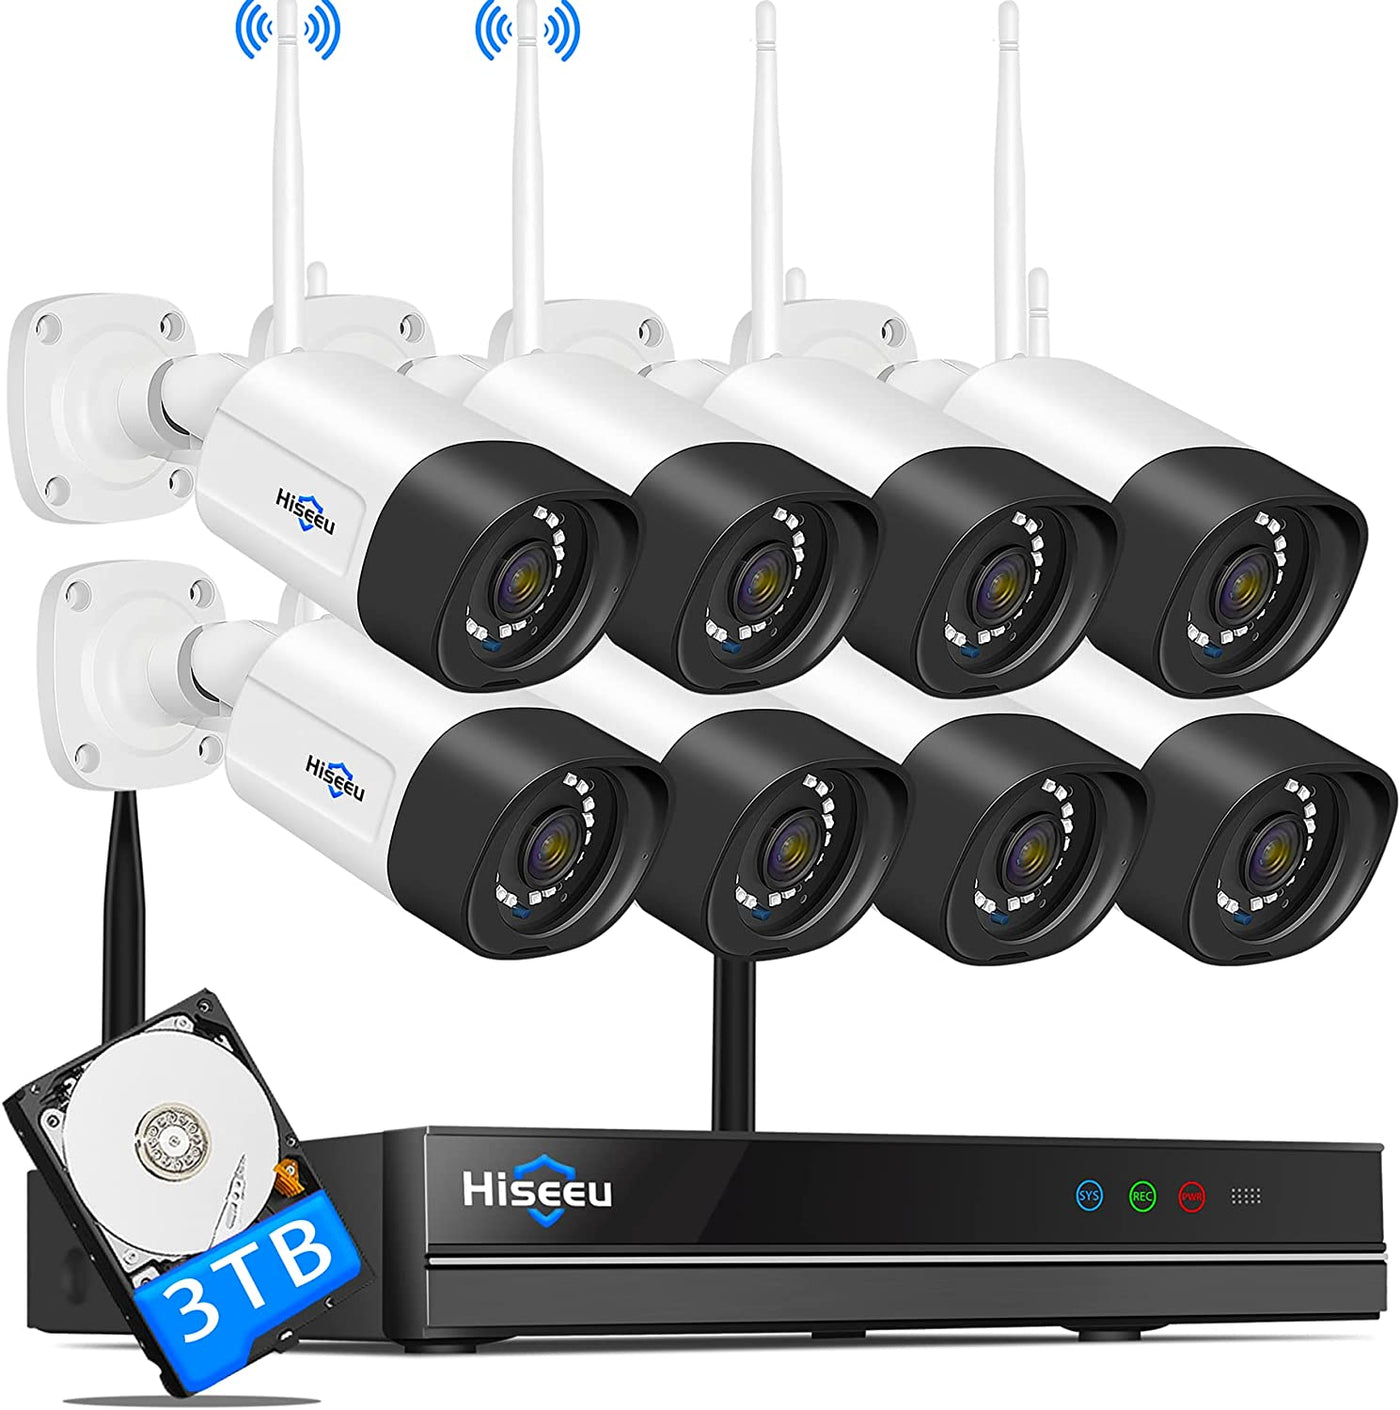 Hiseeu【Dual Wi-Fi,2-Way Audio】 2K WiFi Security Camera System,3TB Hard Drive,3 Megapixel, 8Channel CCTV System,Mobile&PC Remote,Outdoor IP66 Waterproof,Night Vision,Motion Alert,Plug&Play,7/24/Motion Record（Refurbished）